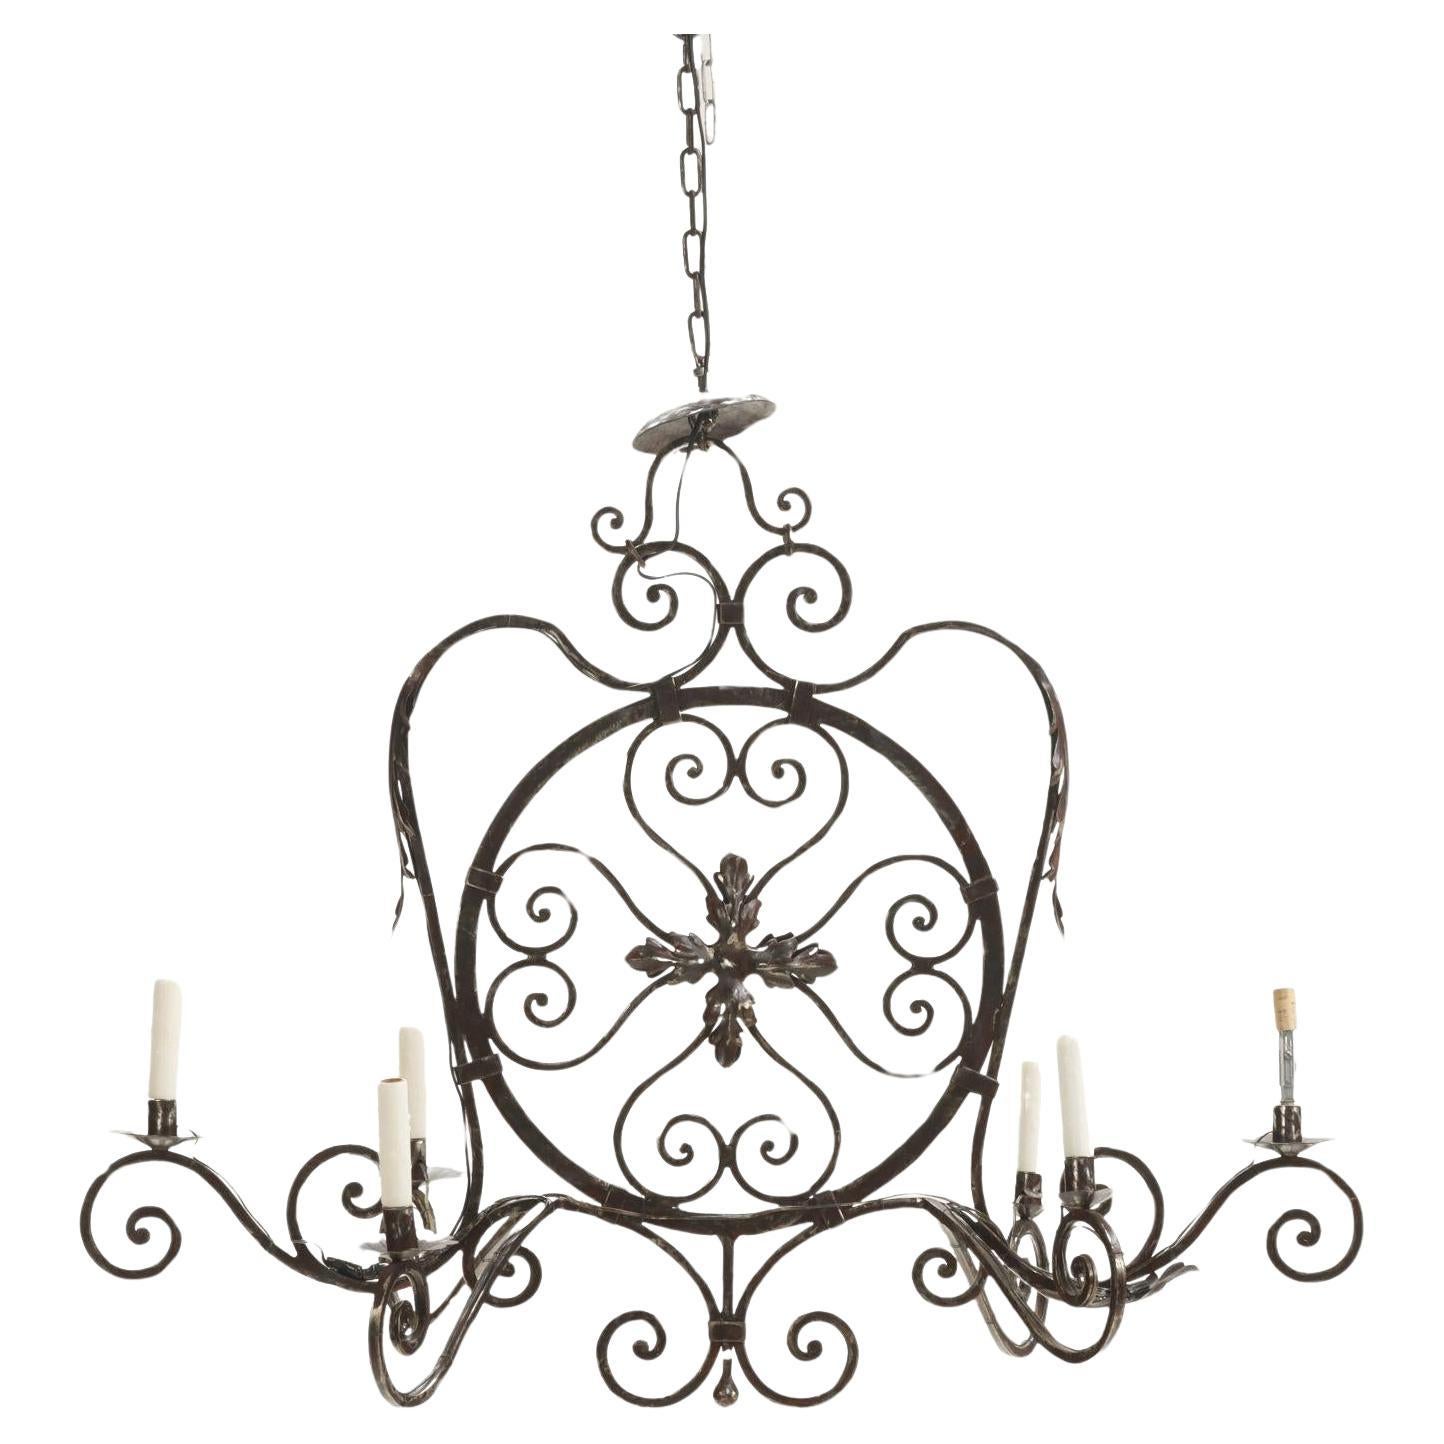 19th Century French Provincial Decorative Steel Chandelier For Sale